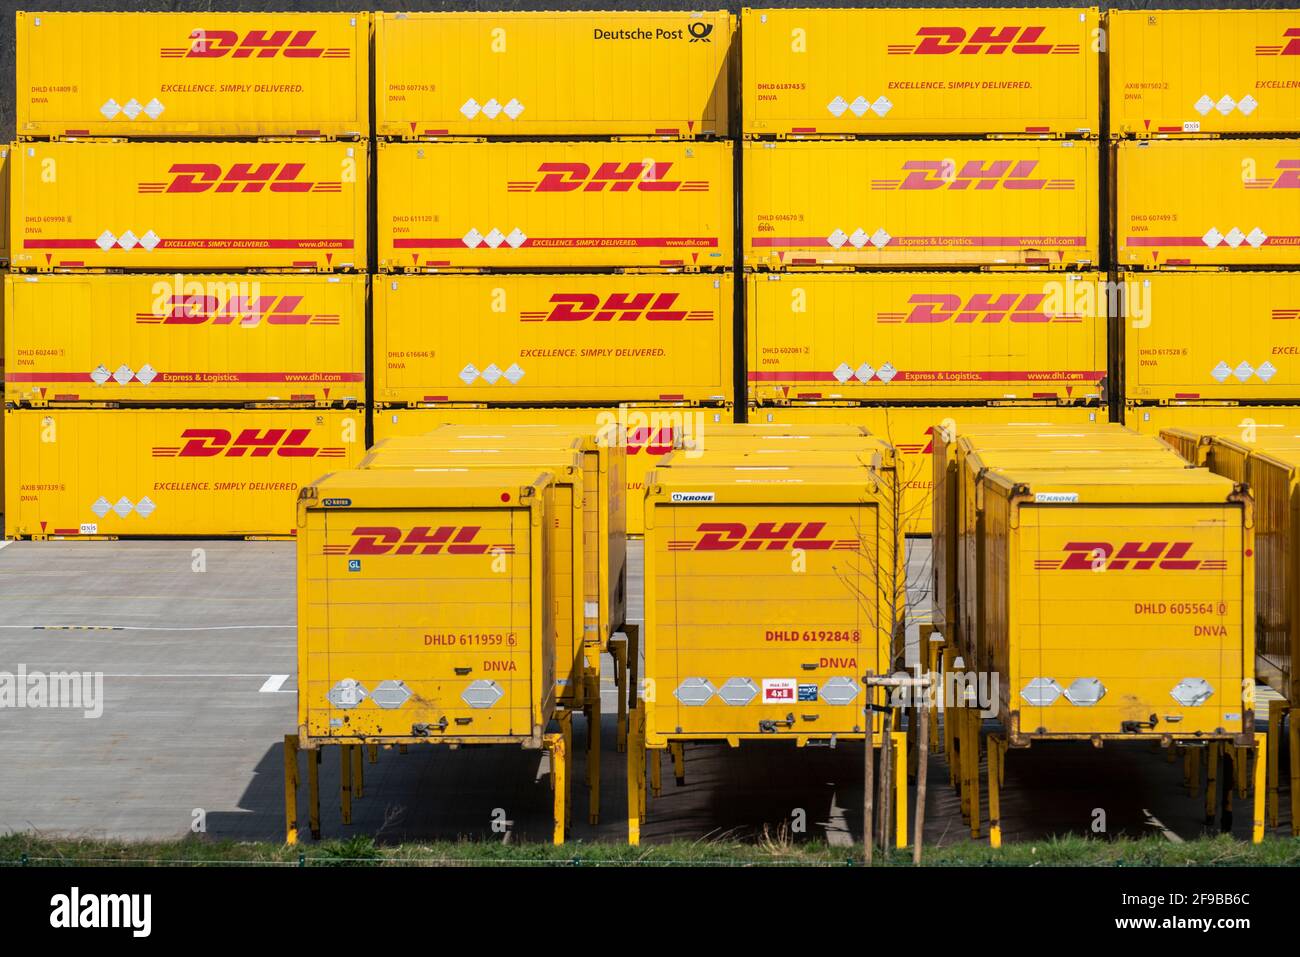 DHL, Deutsche Post, parcel centre, warehouse for freight containers, Krefeld, NRW, Germany, Stock Photo